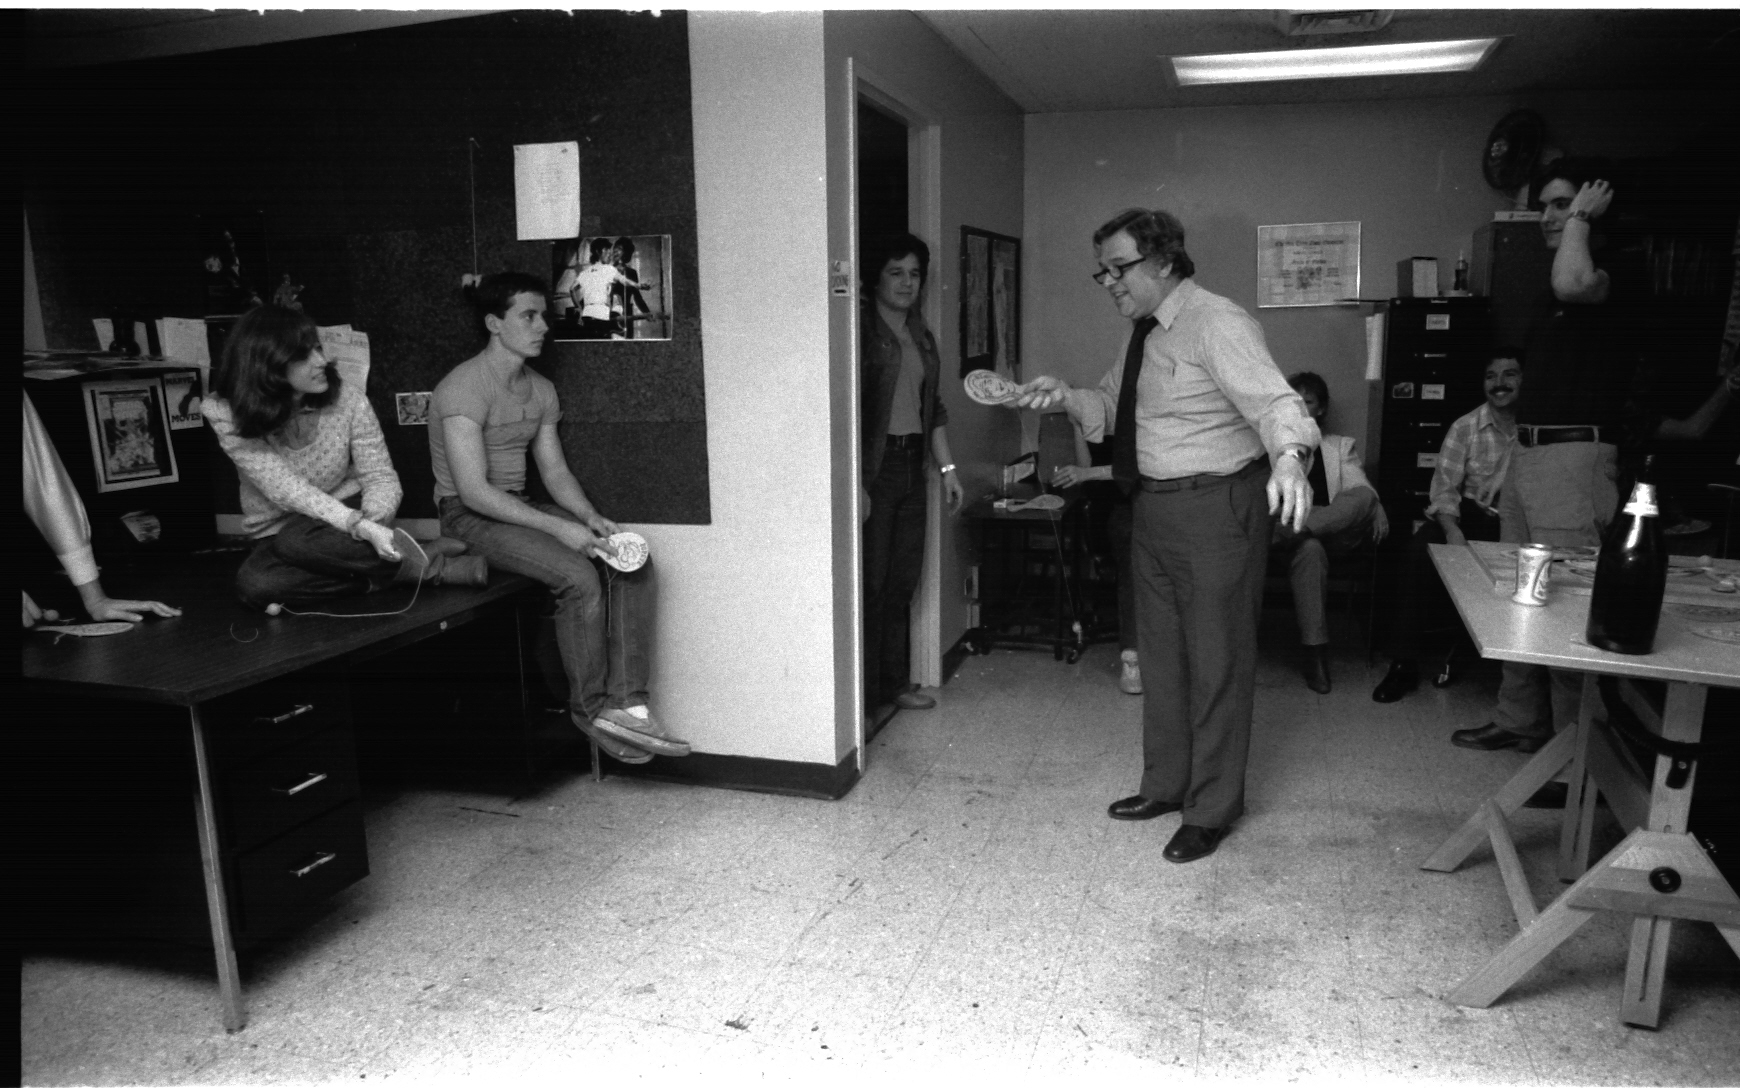 Jazzy Johnny Romita, on staff Art Director, perhaps the greatest penciler/inker who ever took a magnifying glass to a page and generally regarded as the nicest guy in comics-- cannot seem to see the ball for very long. His son, John "JR-JR" Jr., looks on from the doorway, with familial affection.